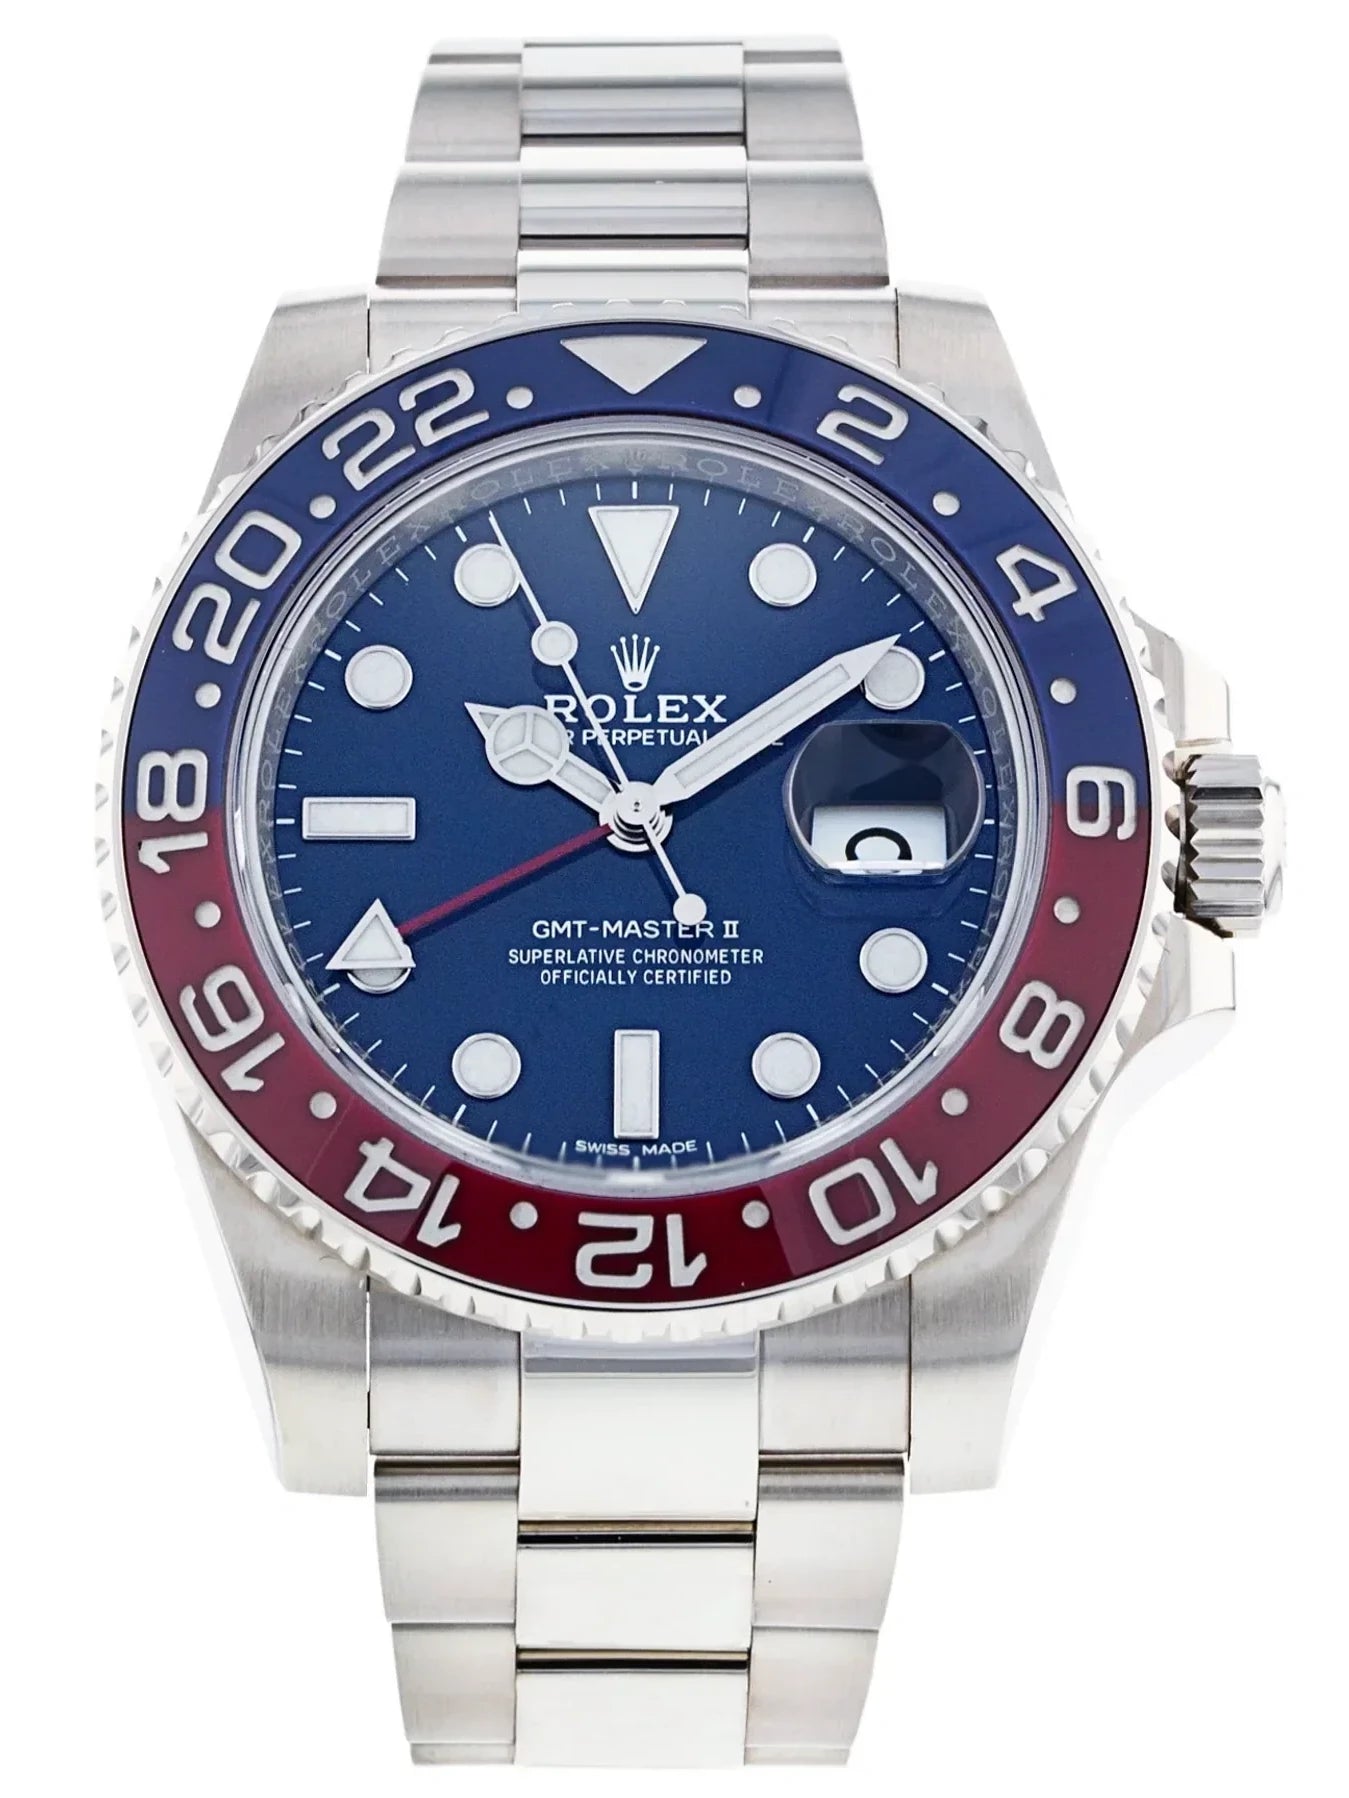 Men's Rolex 40mm GMT Master II White Gold Watch with Black Dial and Pepsi Bezel. (Pre-Owned 116719BLRO)